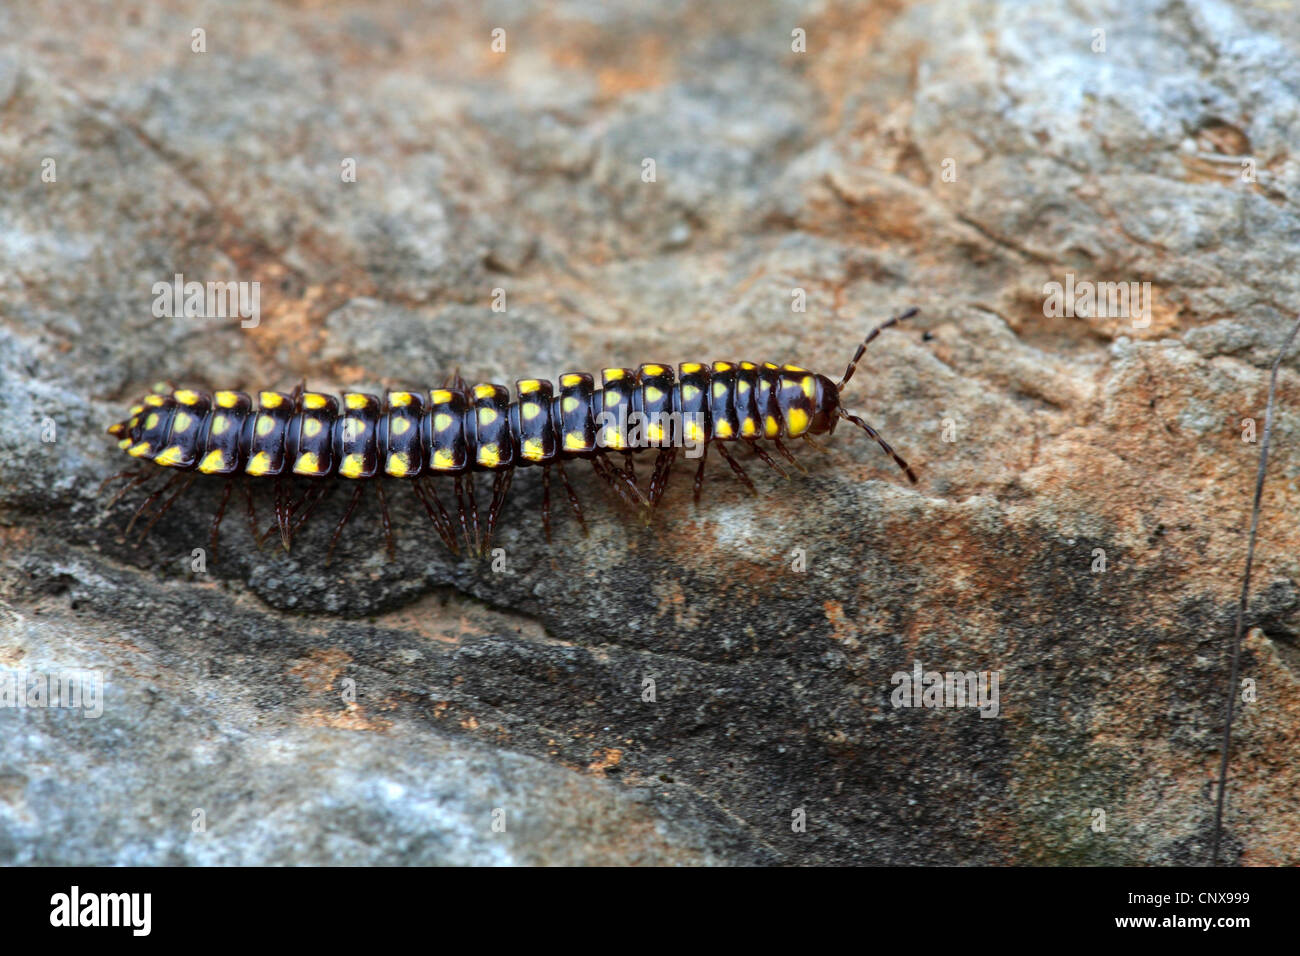 Yellow-and-Black Flat-backed Millipede (Melaphe spec.), crawling on a rock, Greece, Lesbos Stock Photo